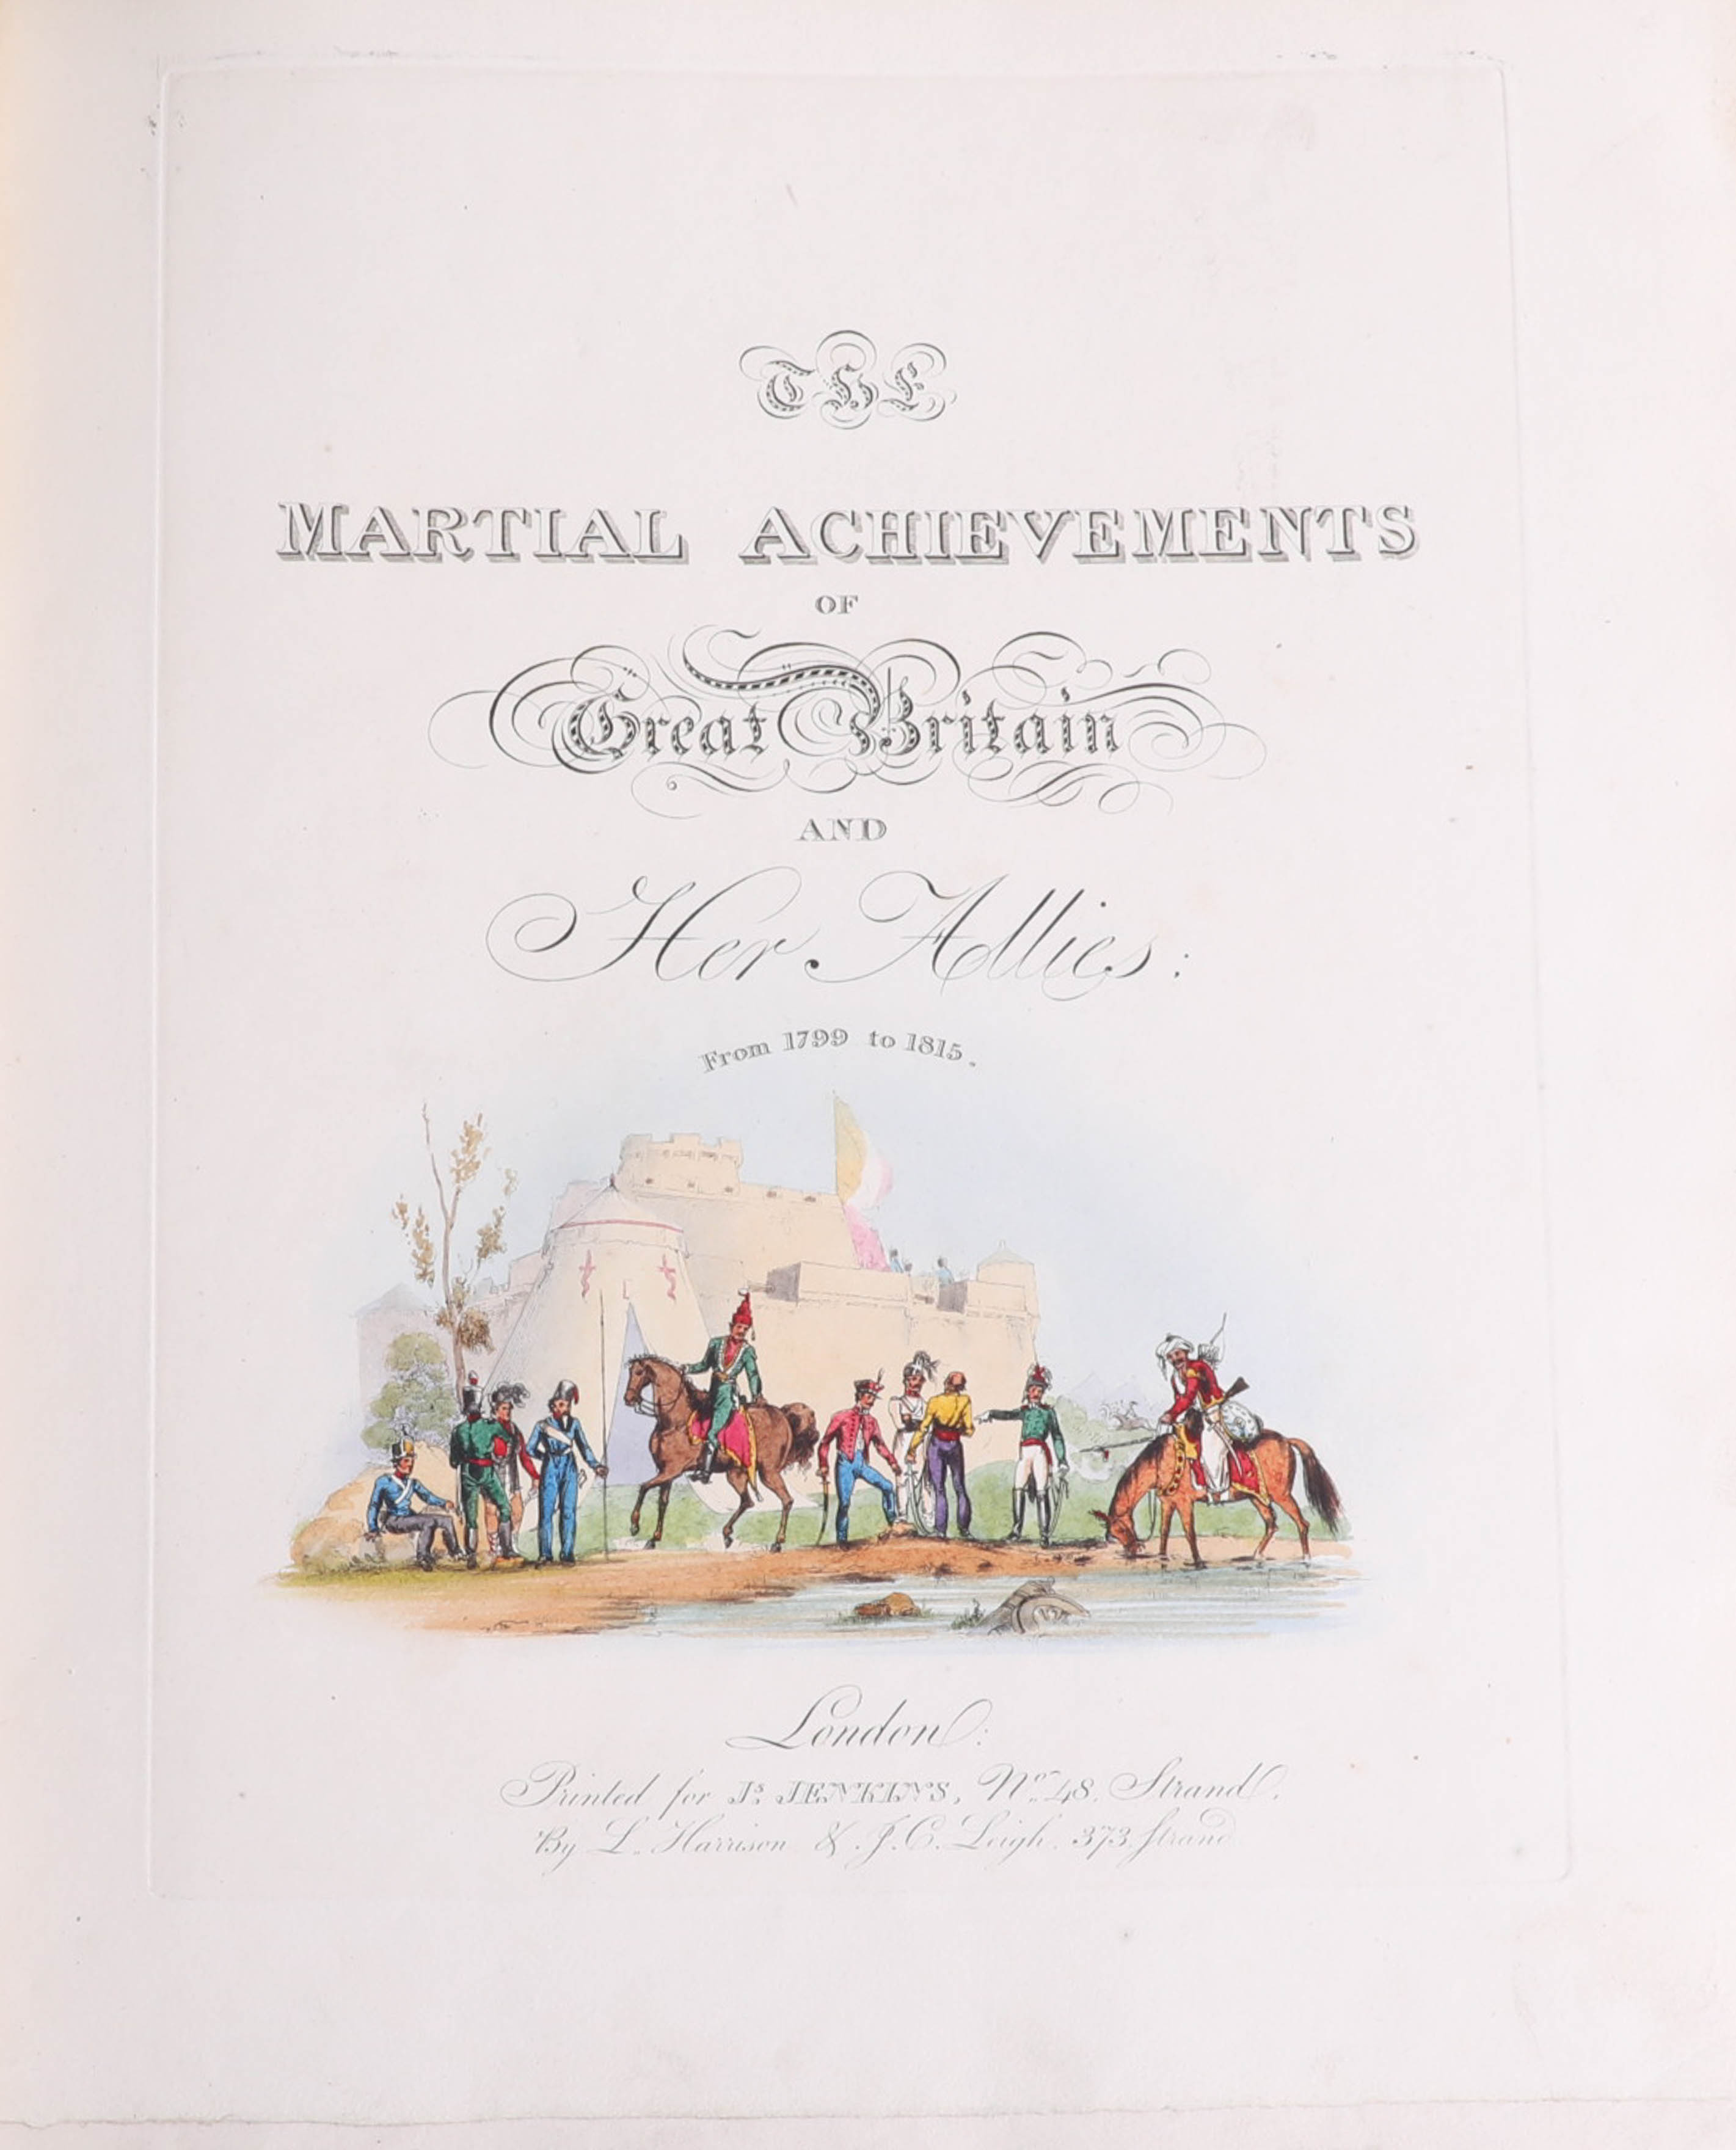 Jenkins (James) 'The Martial Achievements of Great Britain and Her Allies, from 1799 to 1815, - Image 4 of 15